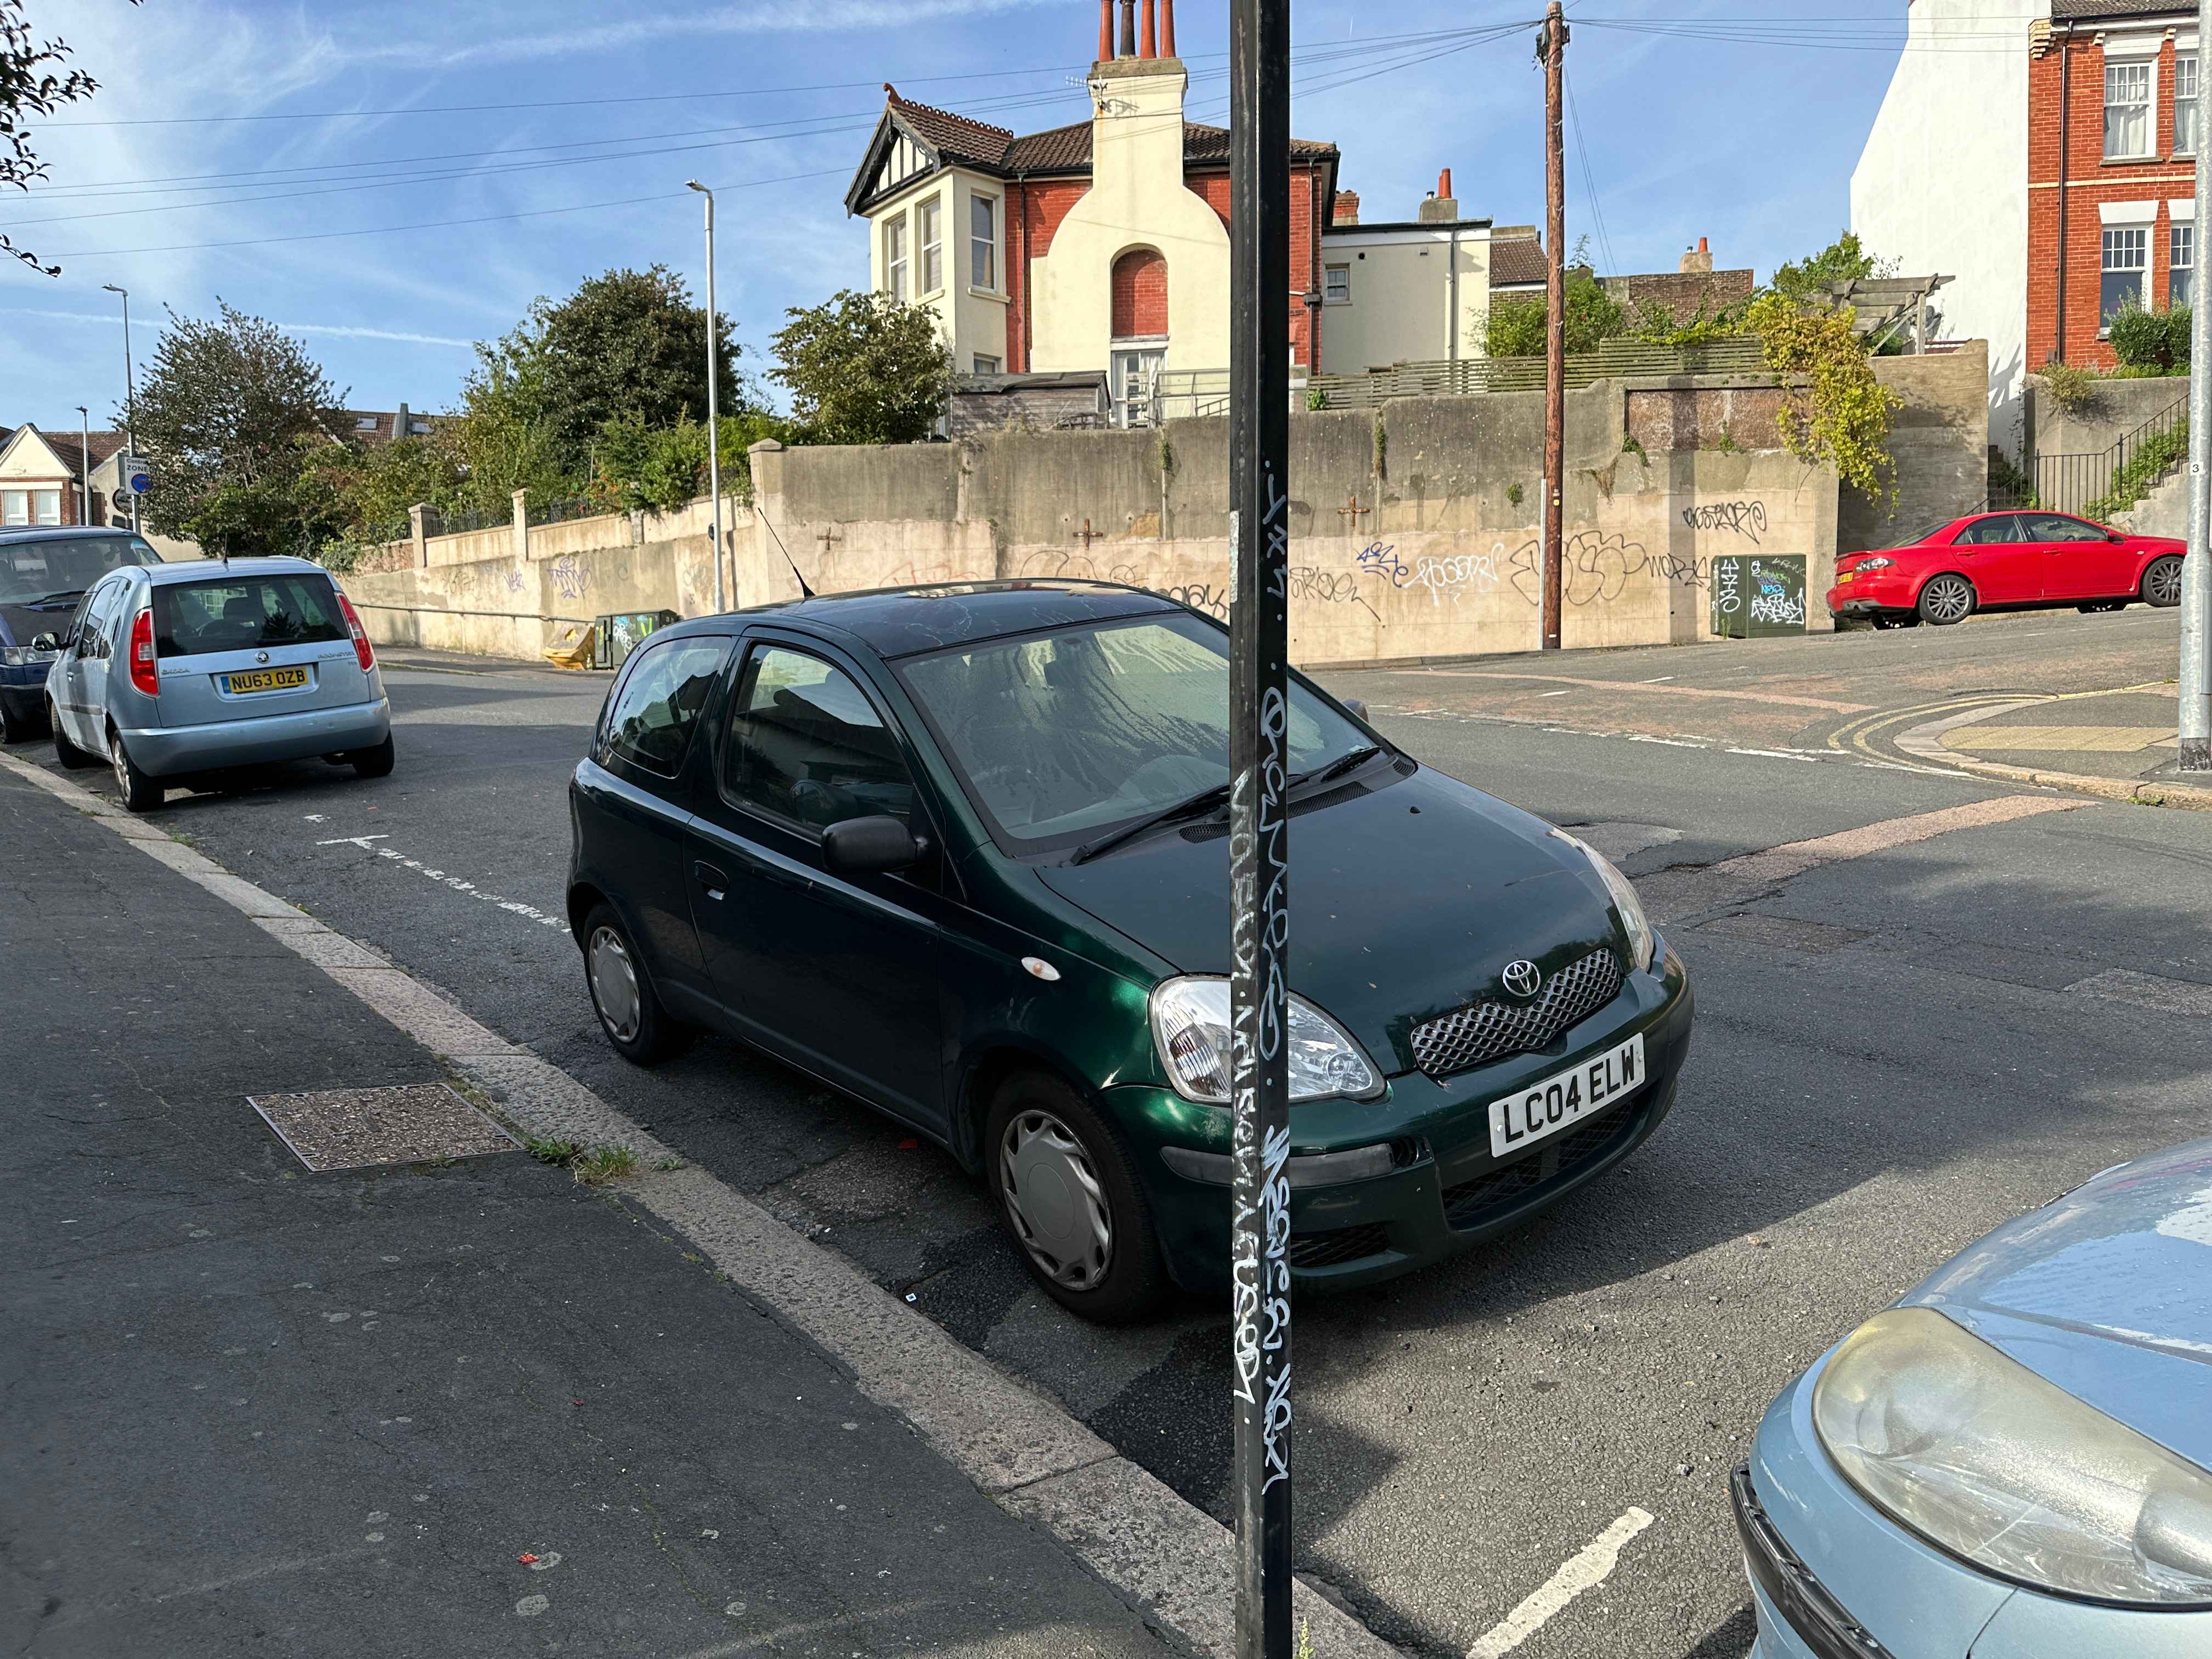 Photograph of LC04 ELW - a Green Toyota Yaris parked in Hollingdean by a non-resident. The first of ten photographs supplied by the residents of Hollingdean.